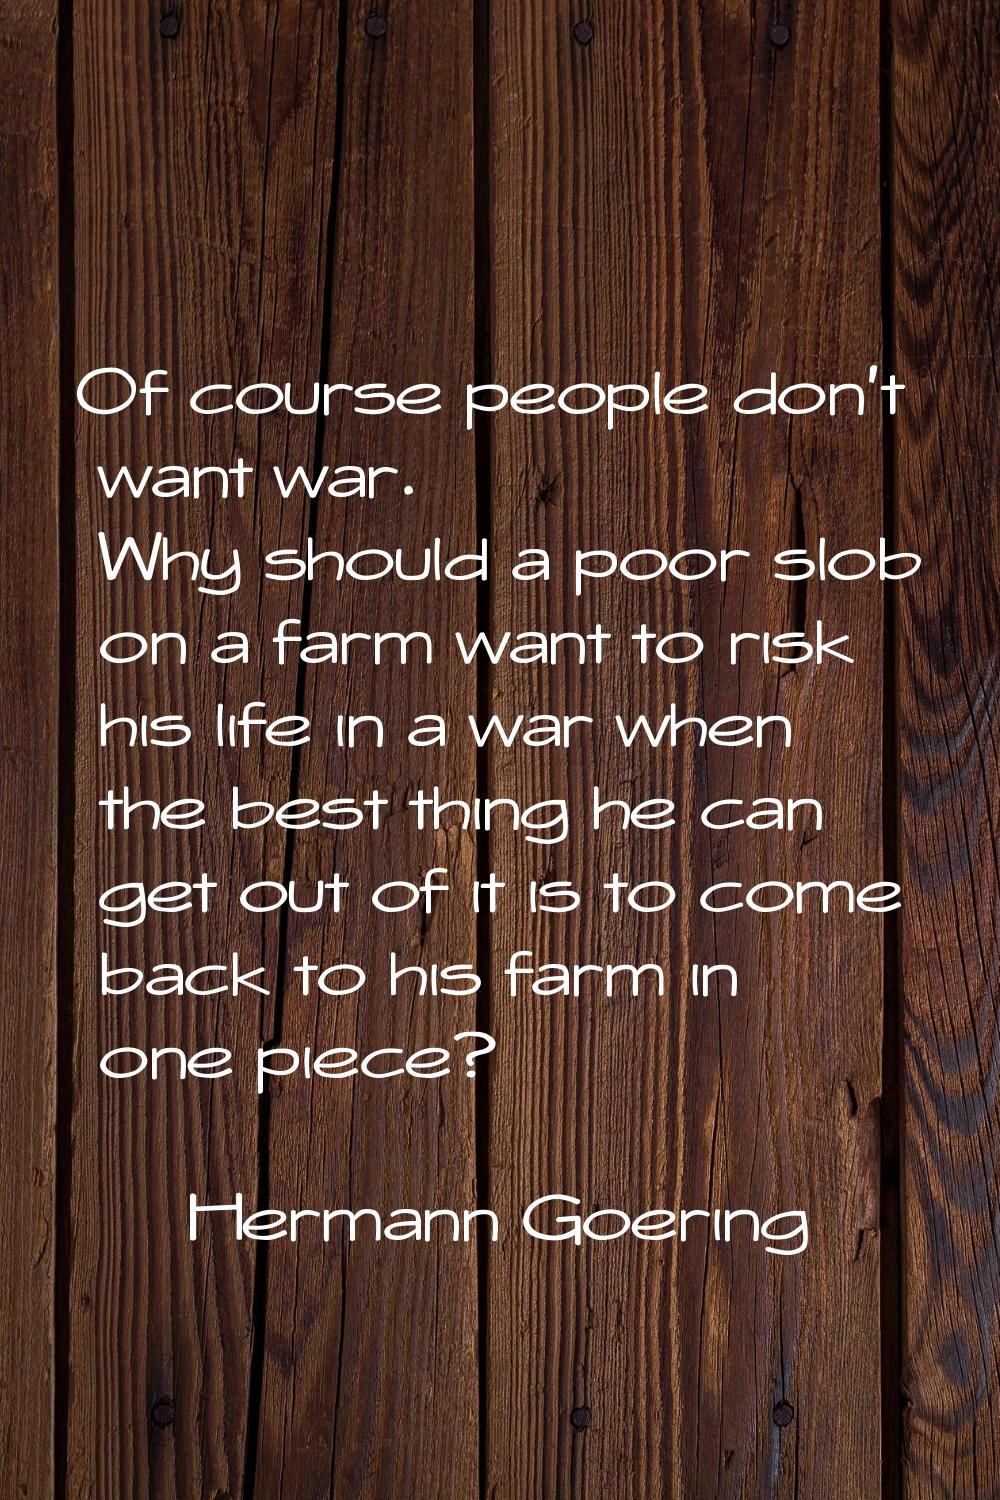 Of course people don't want war. Why should a poor slob on a farm want to risk his life in a war wh